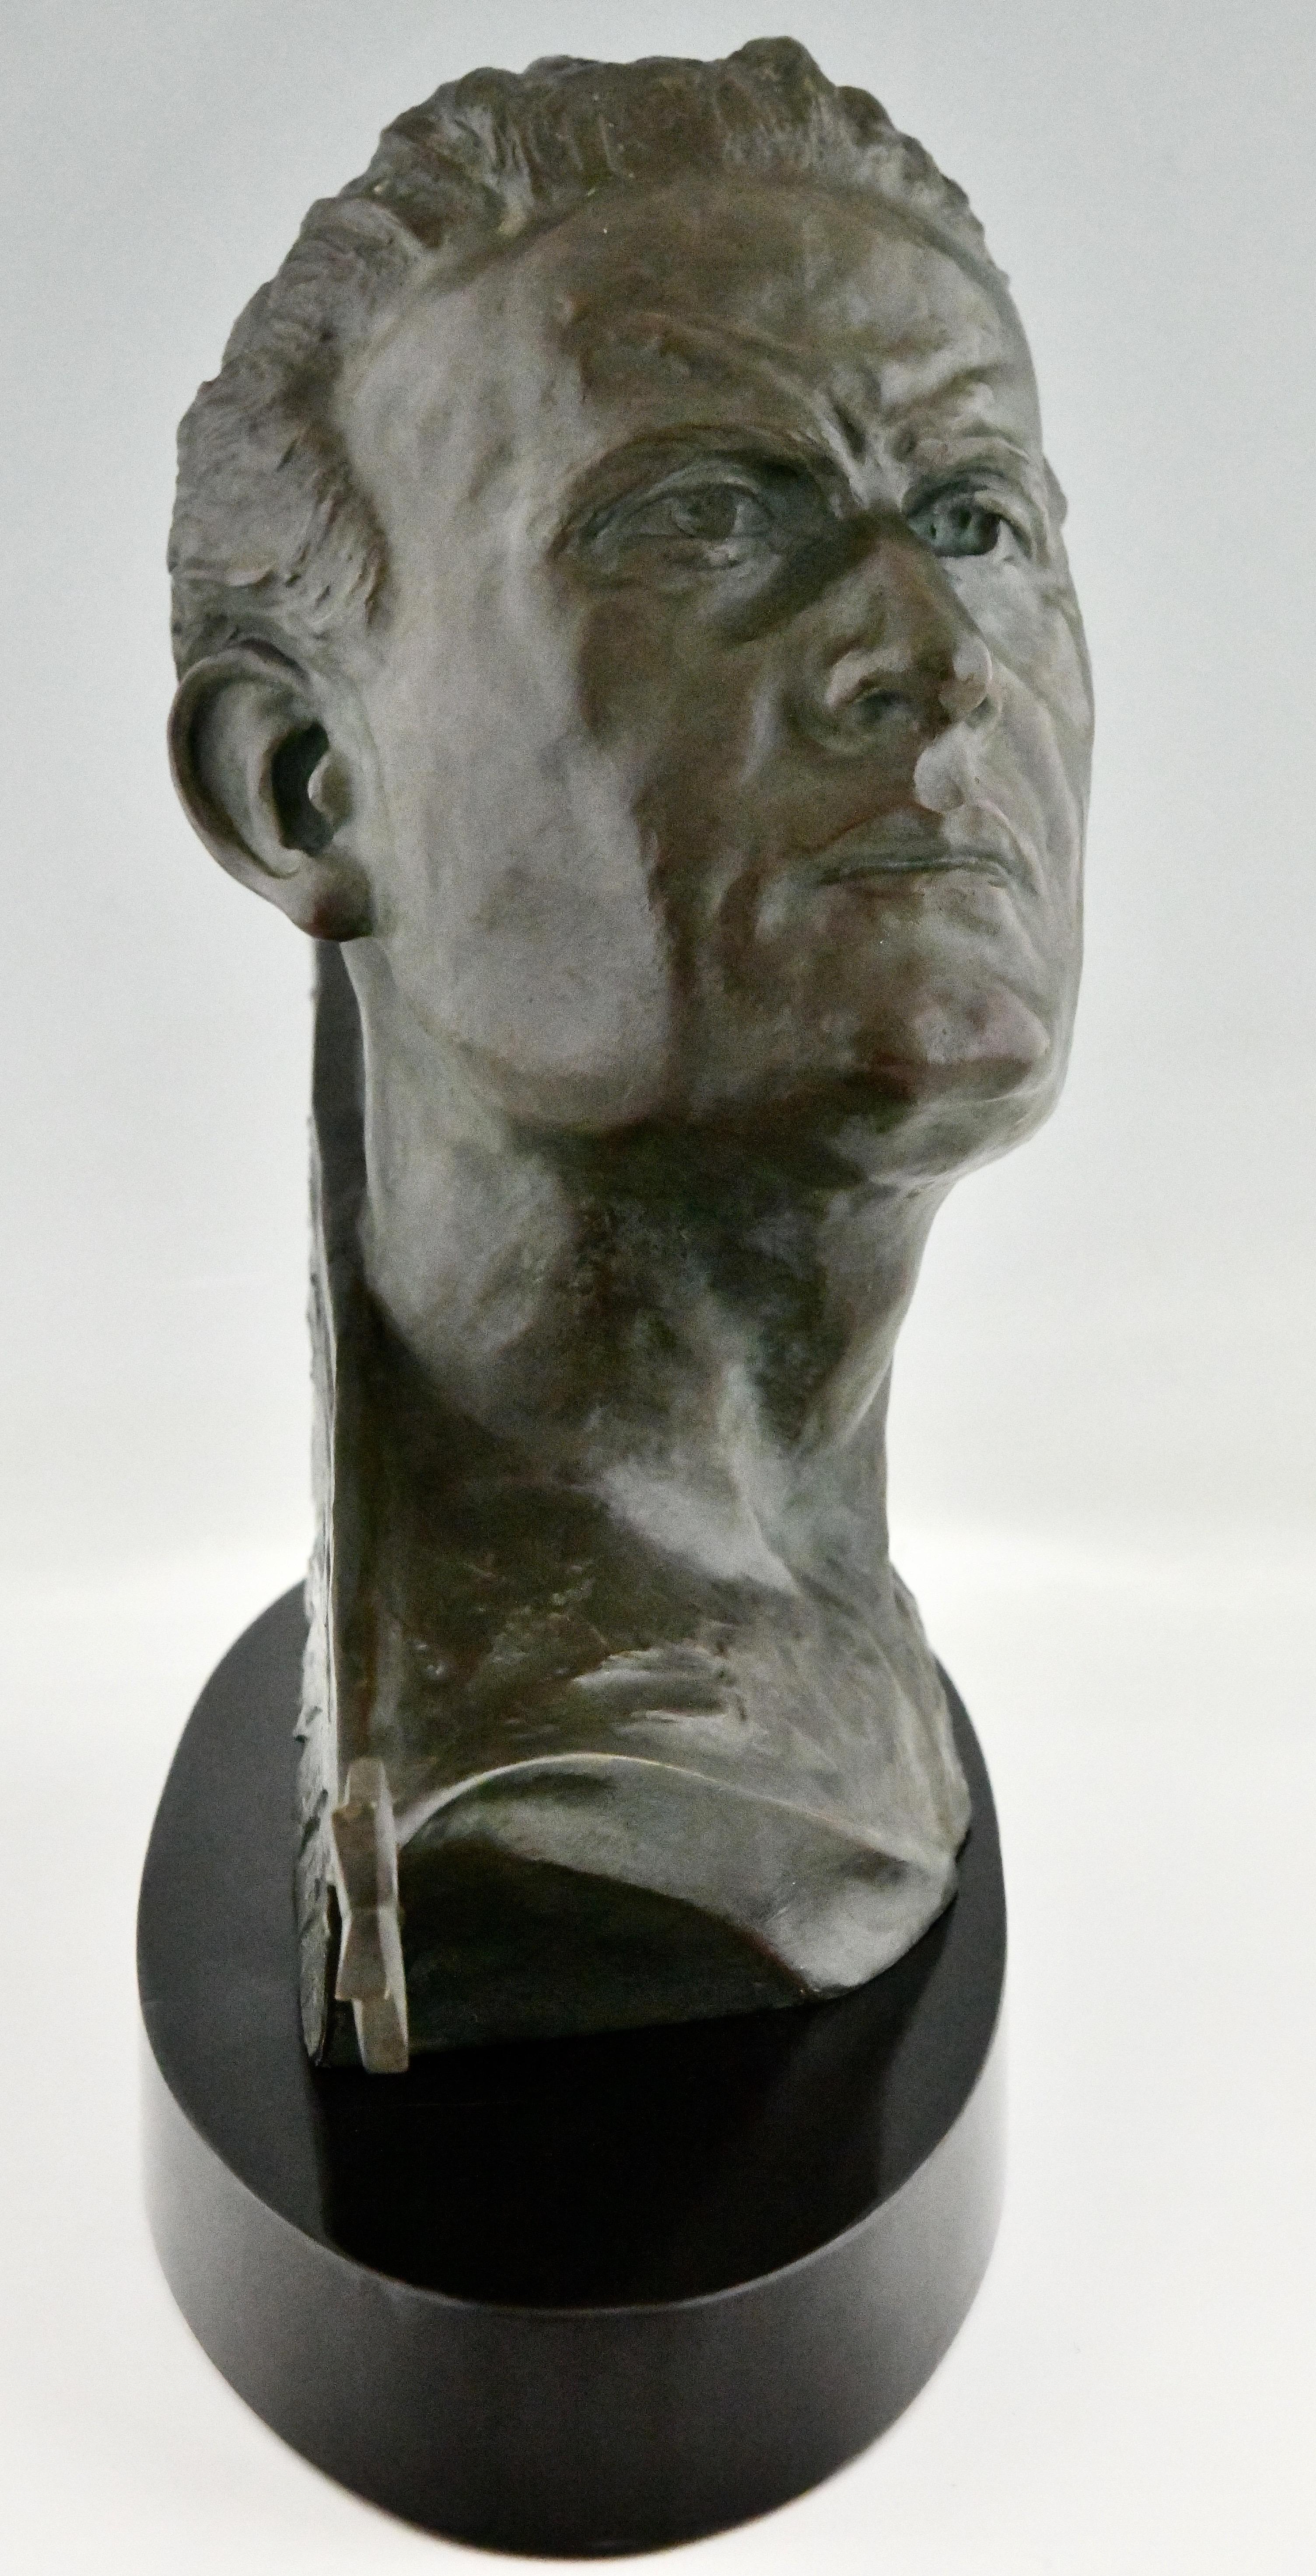 French Art Deco Bronze Sculpture Male Bust of Aviator Jean Mermoz by Frederic Focht